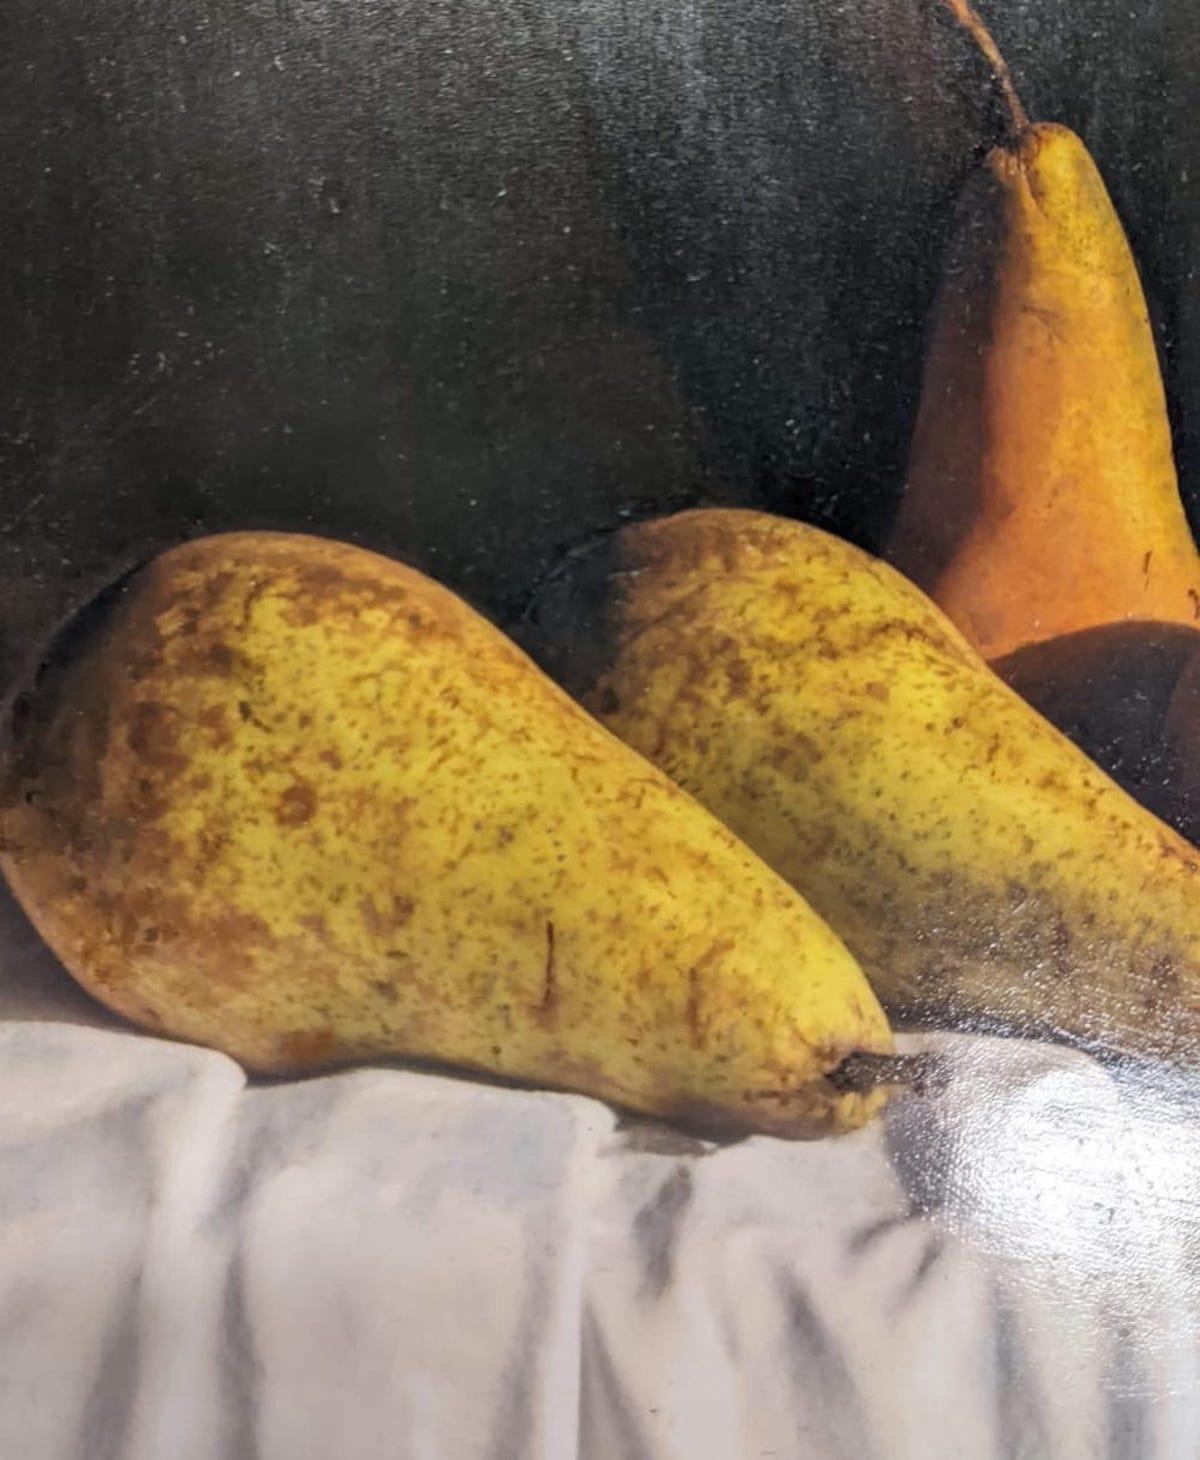 Conference Pears, Kate Verrion, Still life painting, Oil painting, 2022 4